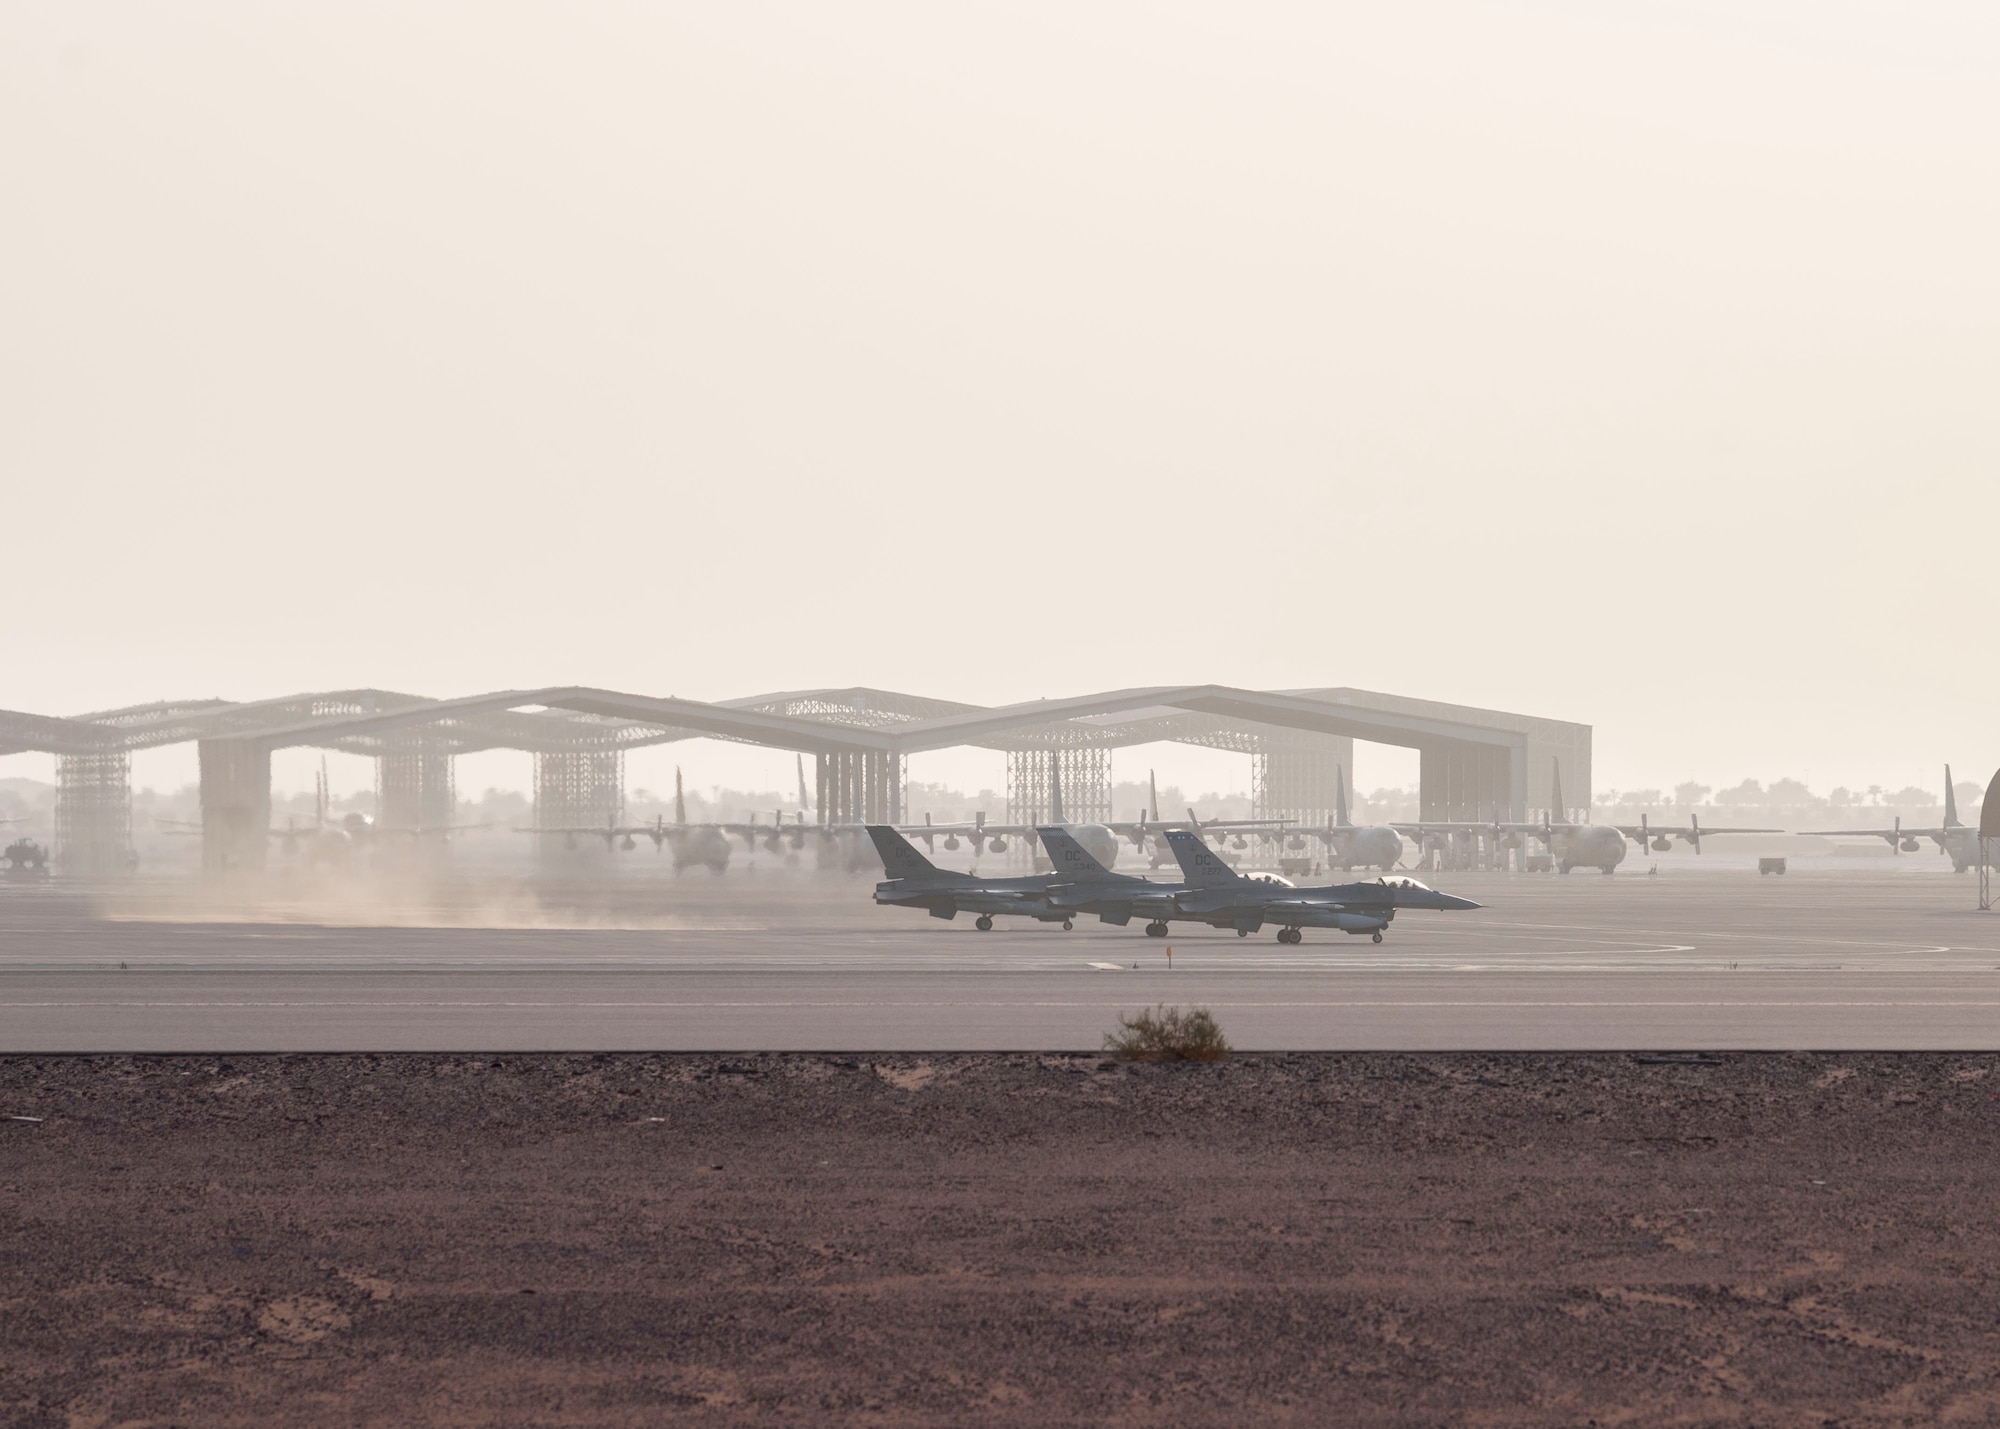 Three U.S. Air Force F-16 Fighting Falcons assigned to the 121st Expeditionary Fighter Squadron prepare for takeoff from Prince Sultan Air Base, Kingdom of Saudi Arabia, prior to flying to Al Udeid Air Base, Qatar for Exercise Sky Shield III, July 31, 2021.  Sky Shield is a bilateral defensive counter air and combat search and rescue exercise designed to validate U.S. Air Forces Central and Qatar Emiri Air Force’s combined capability to defend regional airspace. The event allowed the 378th Air Expeditionary Wing to demonstrate its agile combat employment capabilities of repositioning forces in various locations and rapidly generating combat airpower. (U.S. Air Force photo by Staff Sgt. Caleb Pavao)